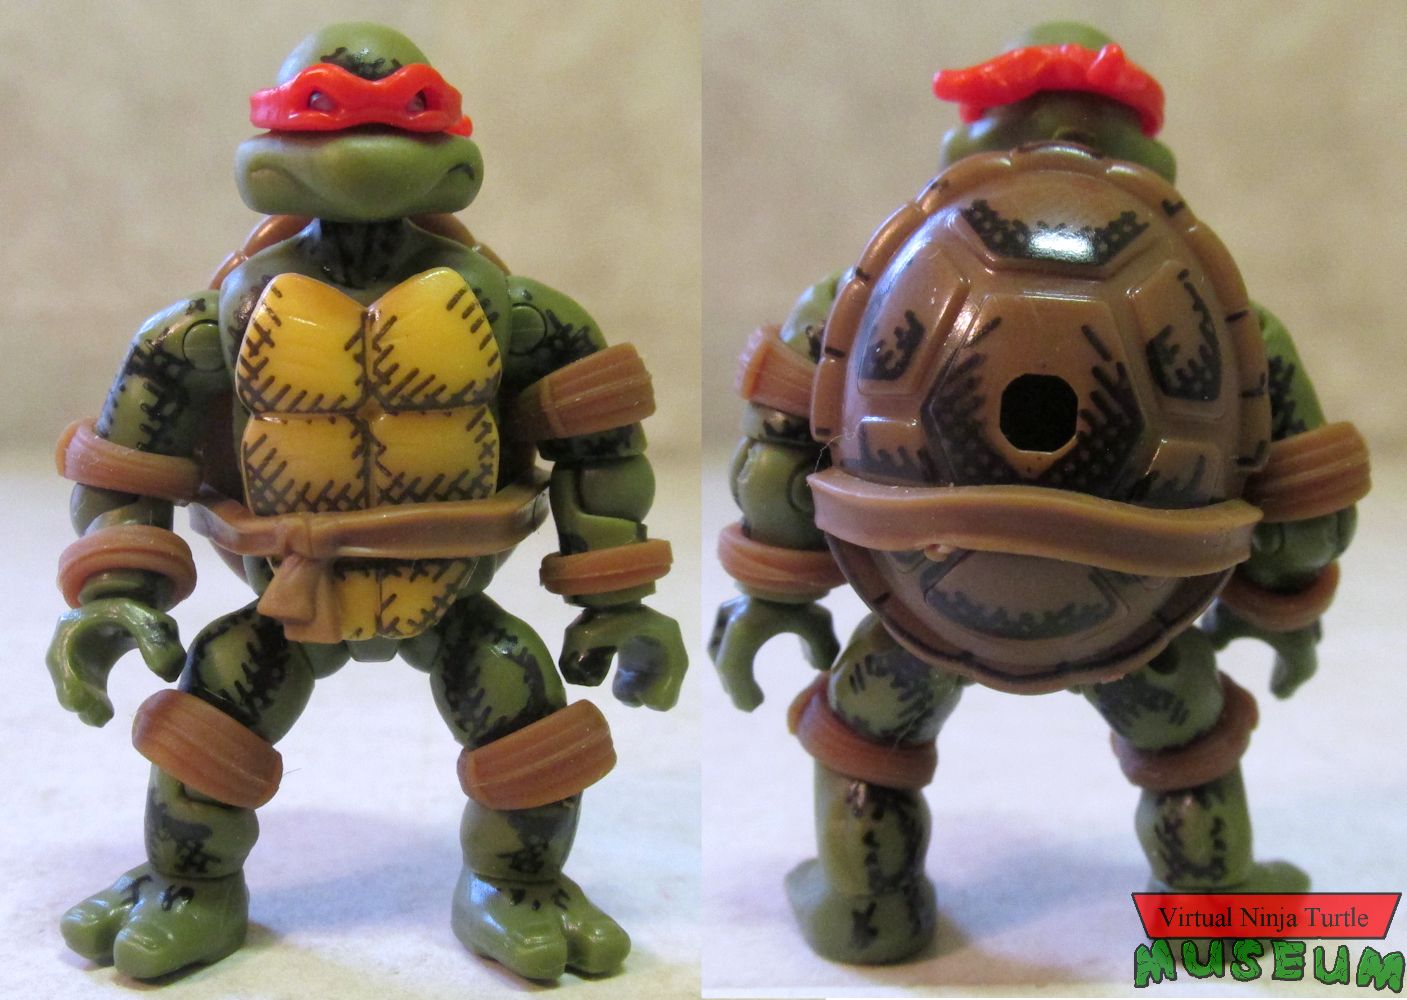 Heroes Series 5 Donatello front and back